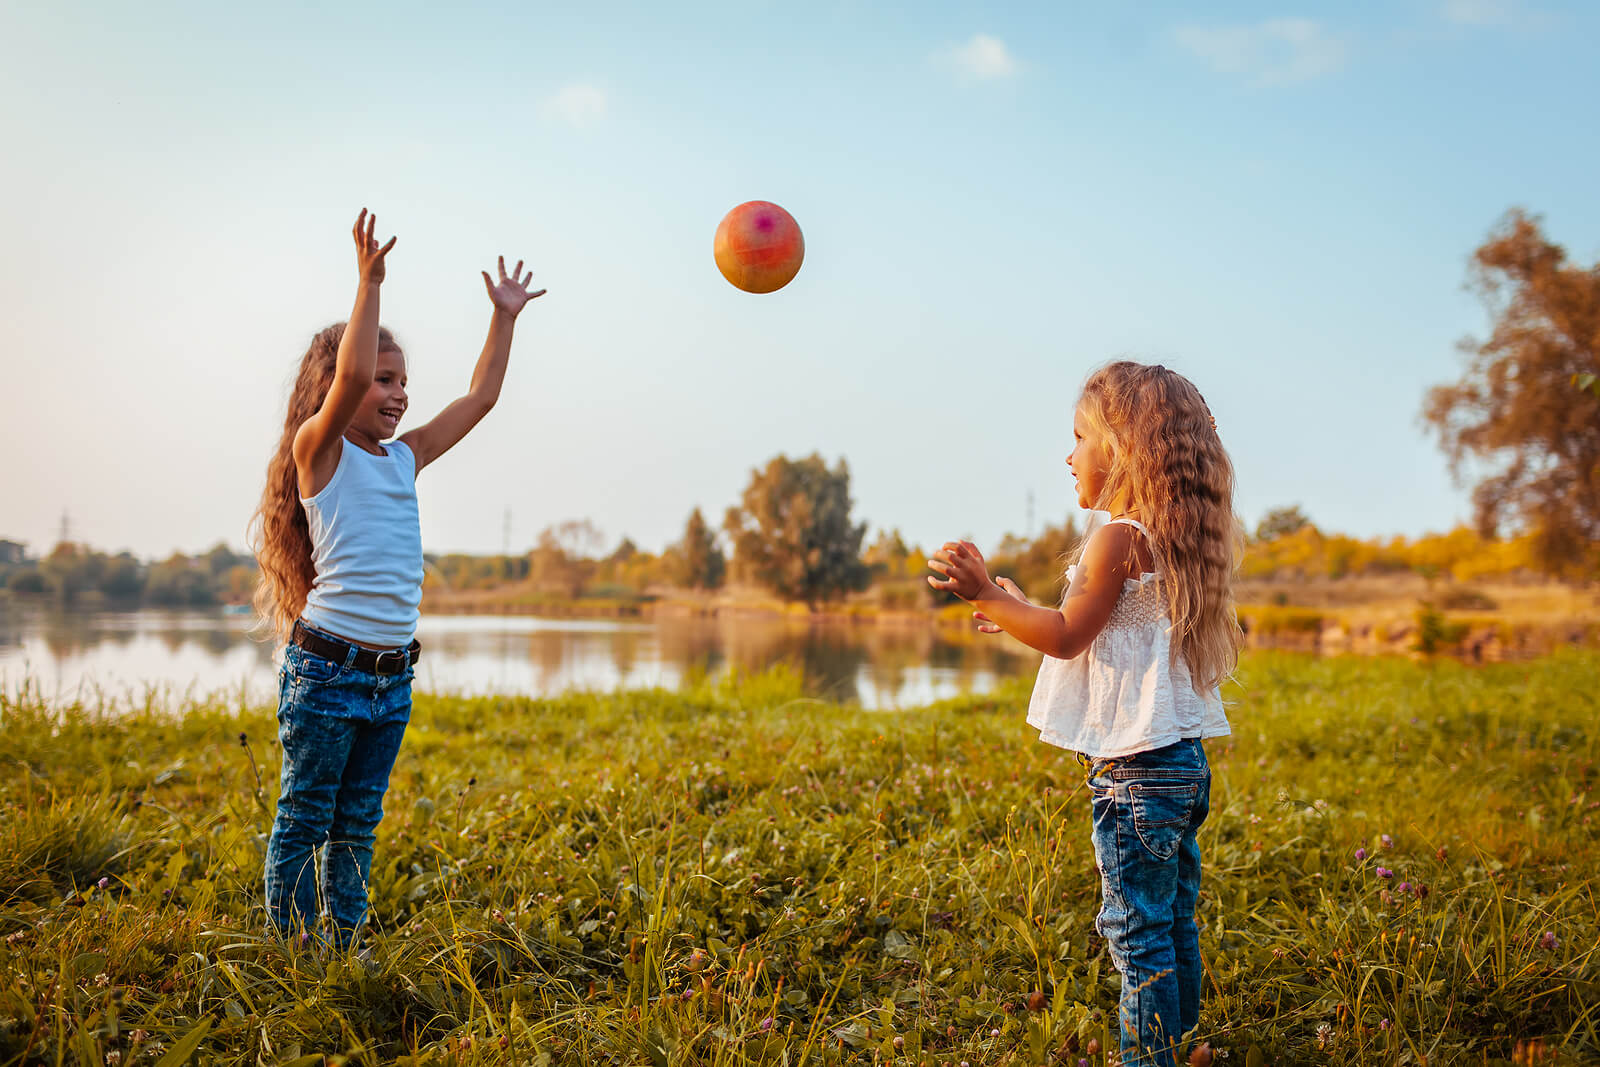 Two young girls playing catch in the grass near a lake.